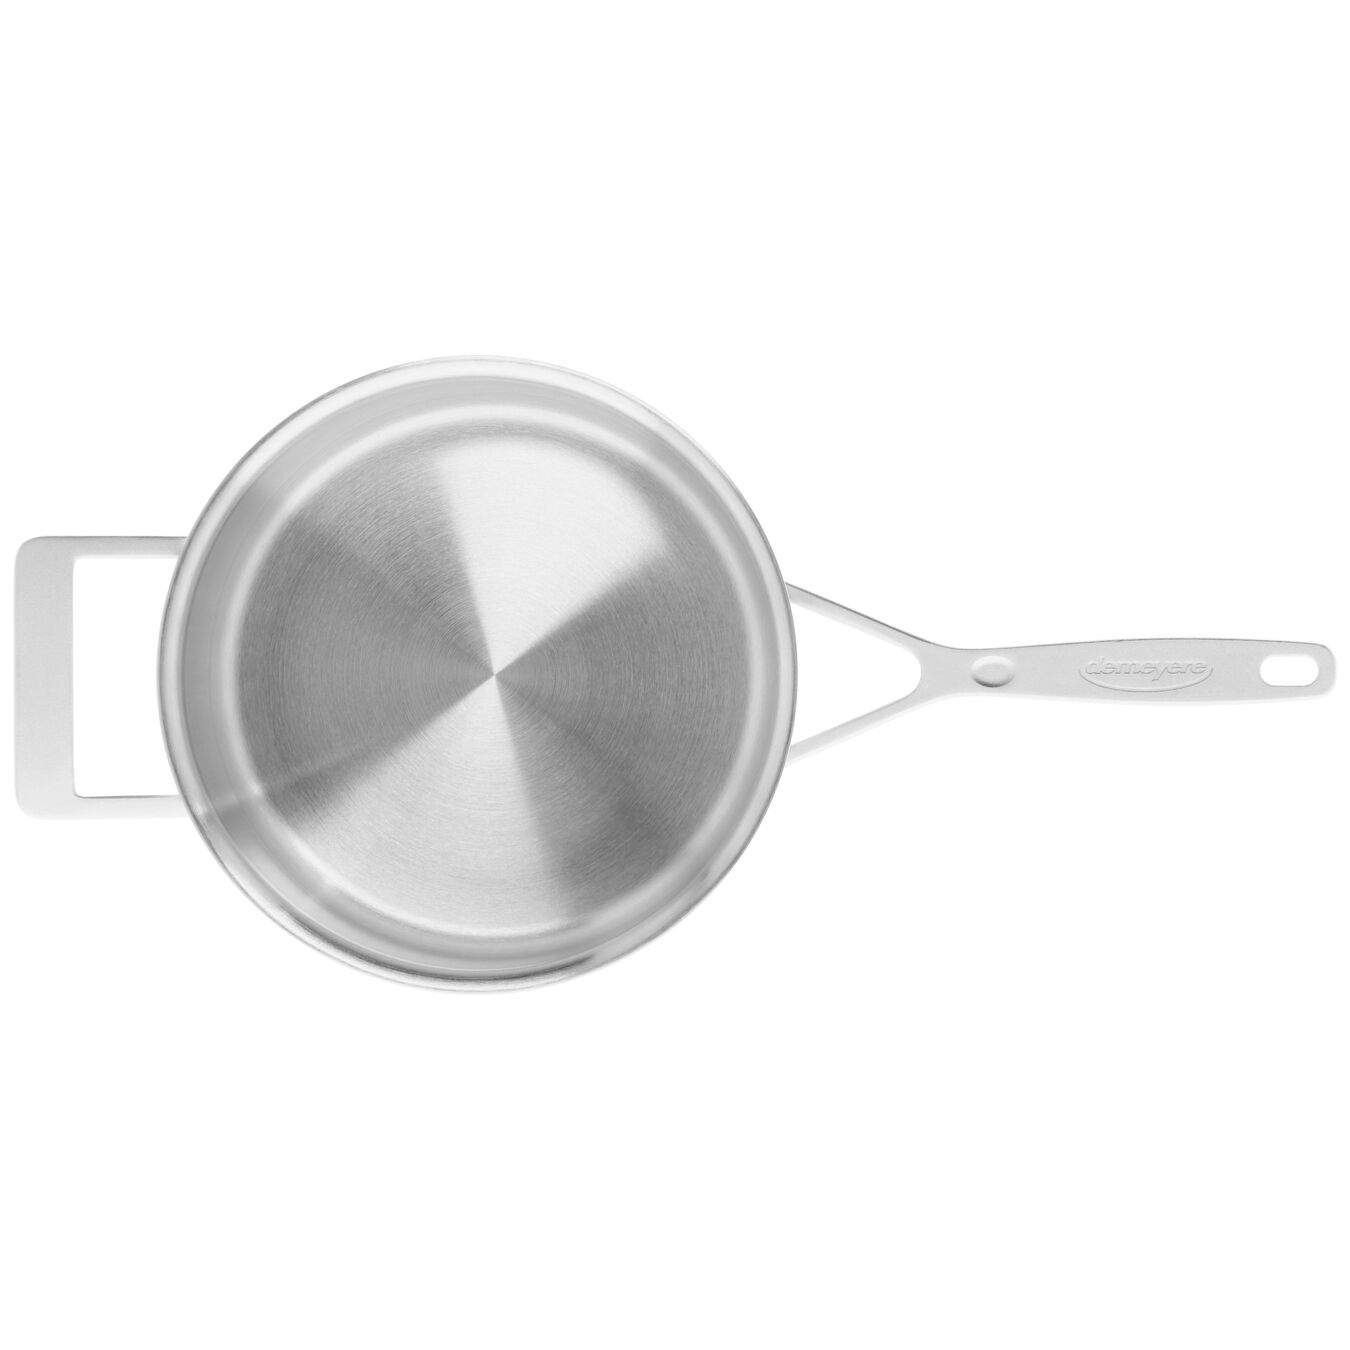 4 l 18/10 Stainless Steel round Sauce pan with lid, silver,,large 5